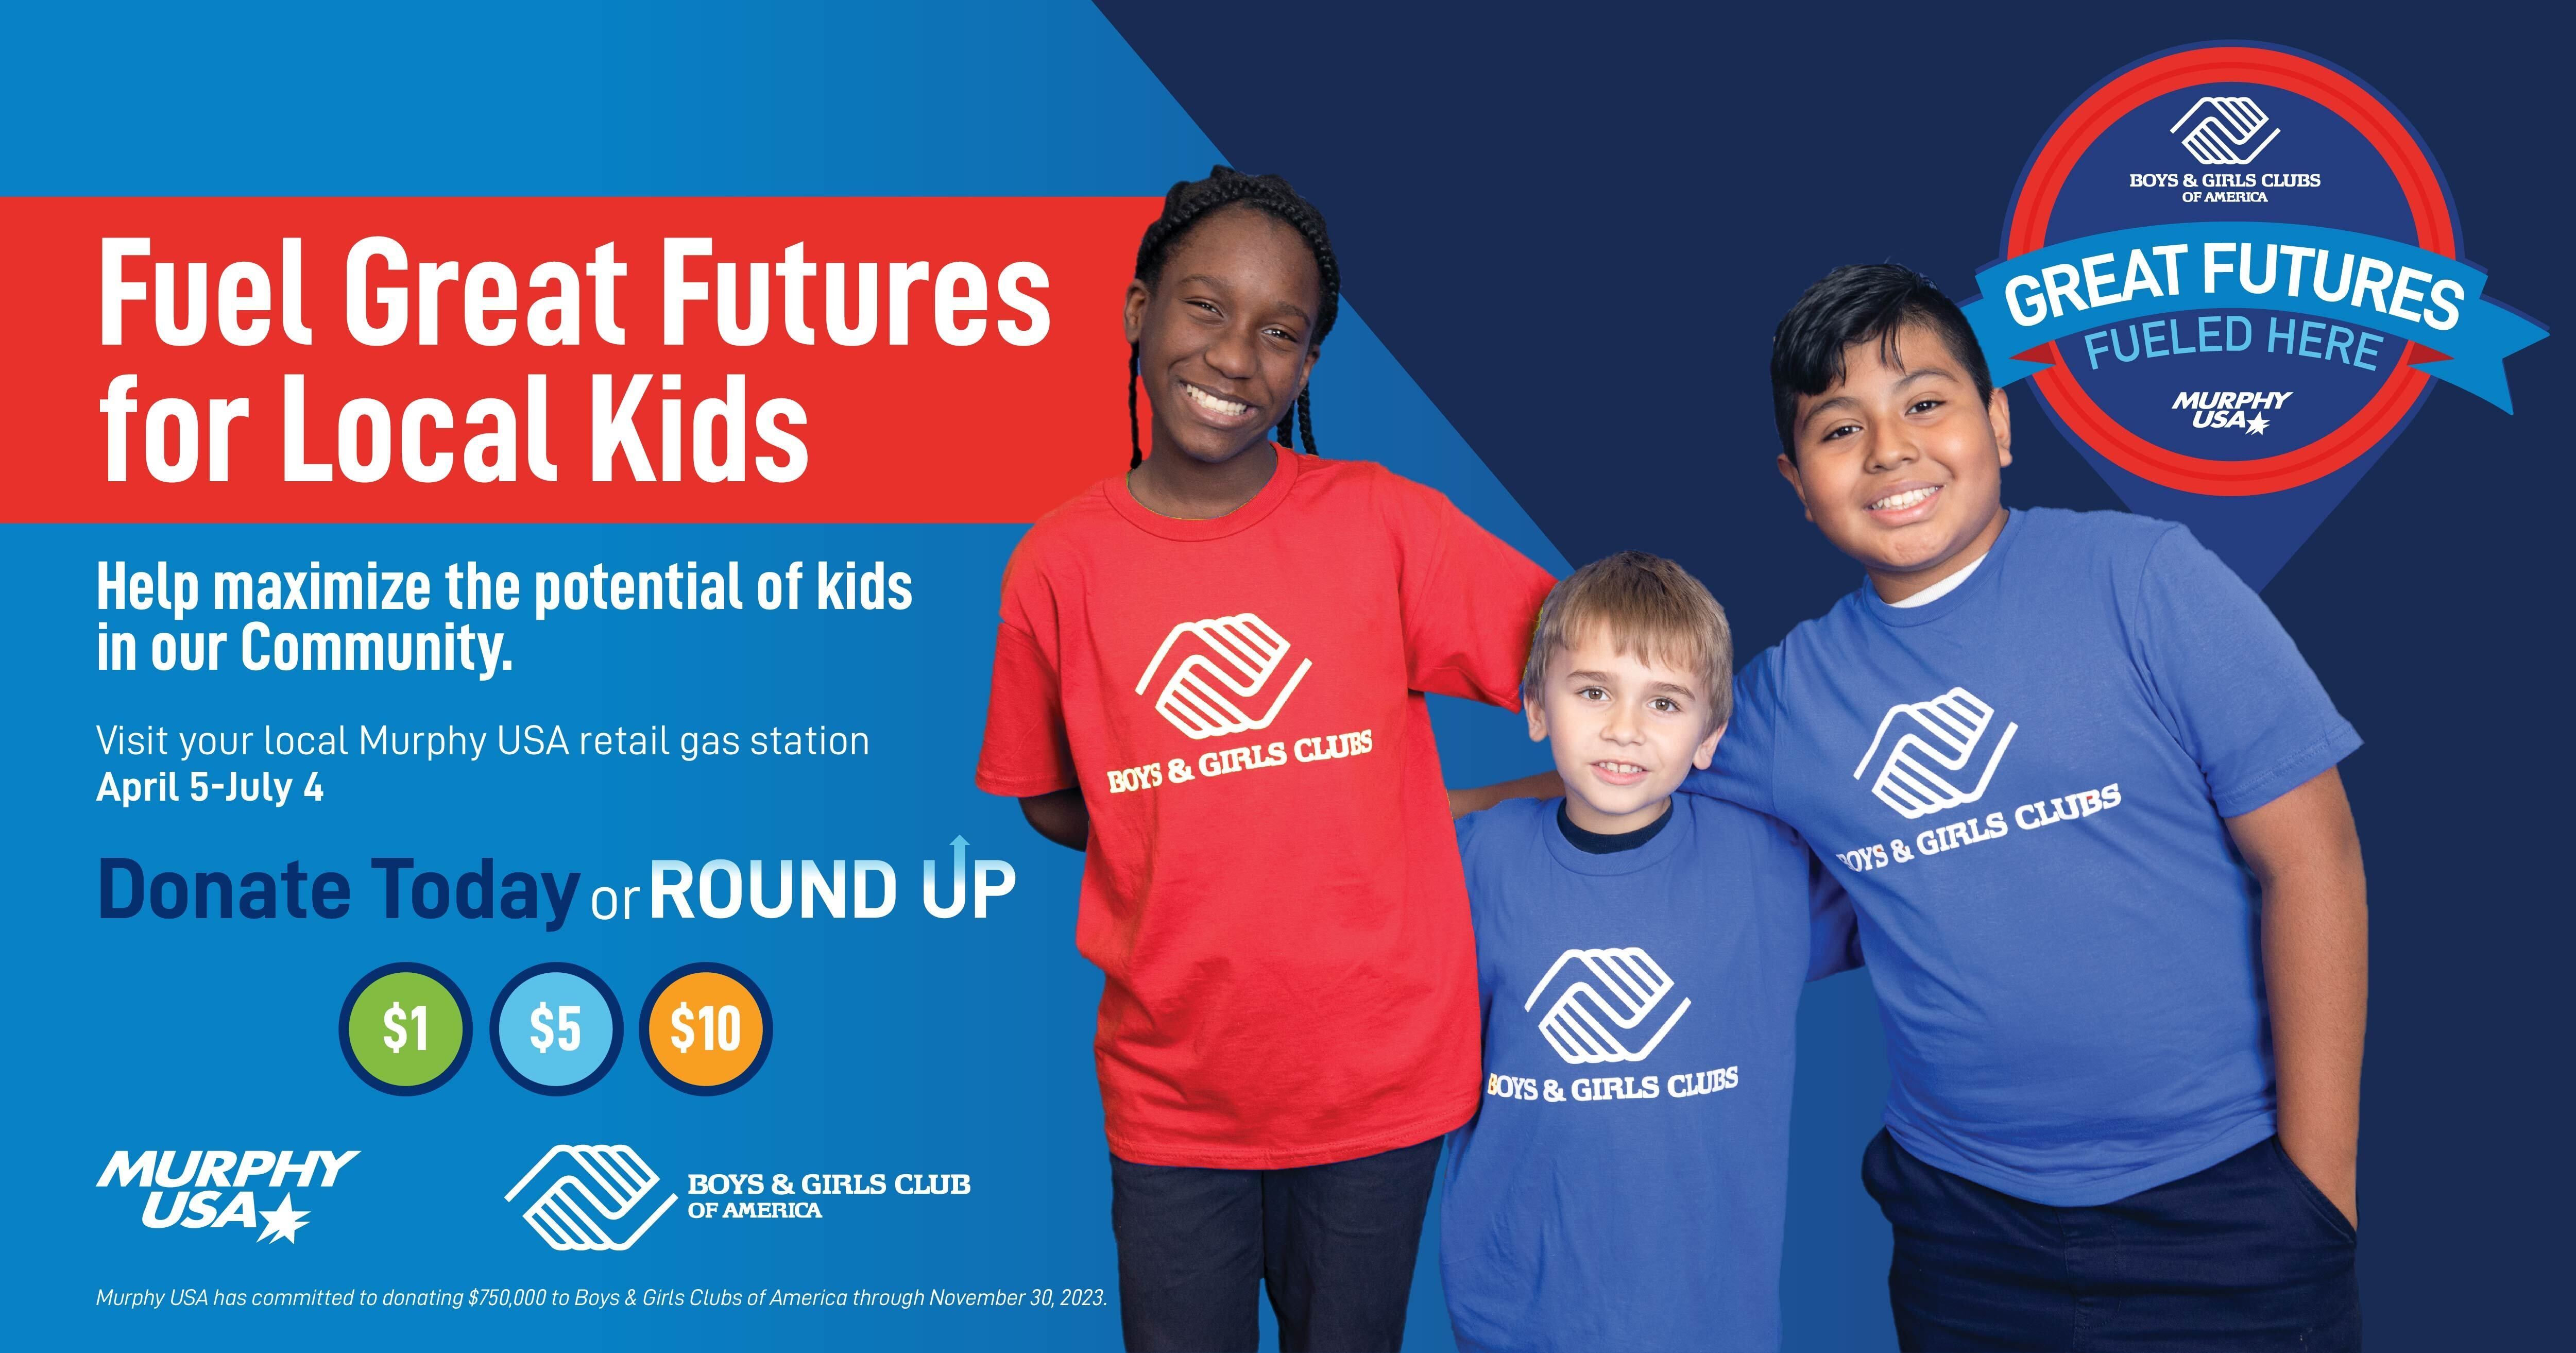 Smiling kids with a Great Futures Fueled Here banner